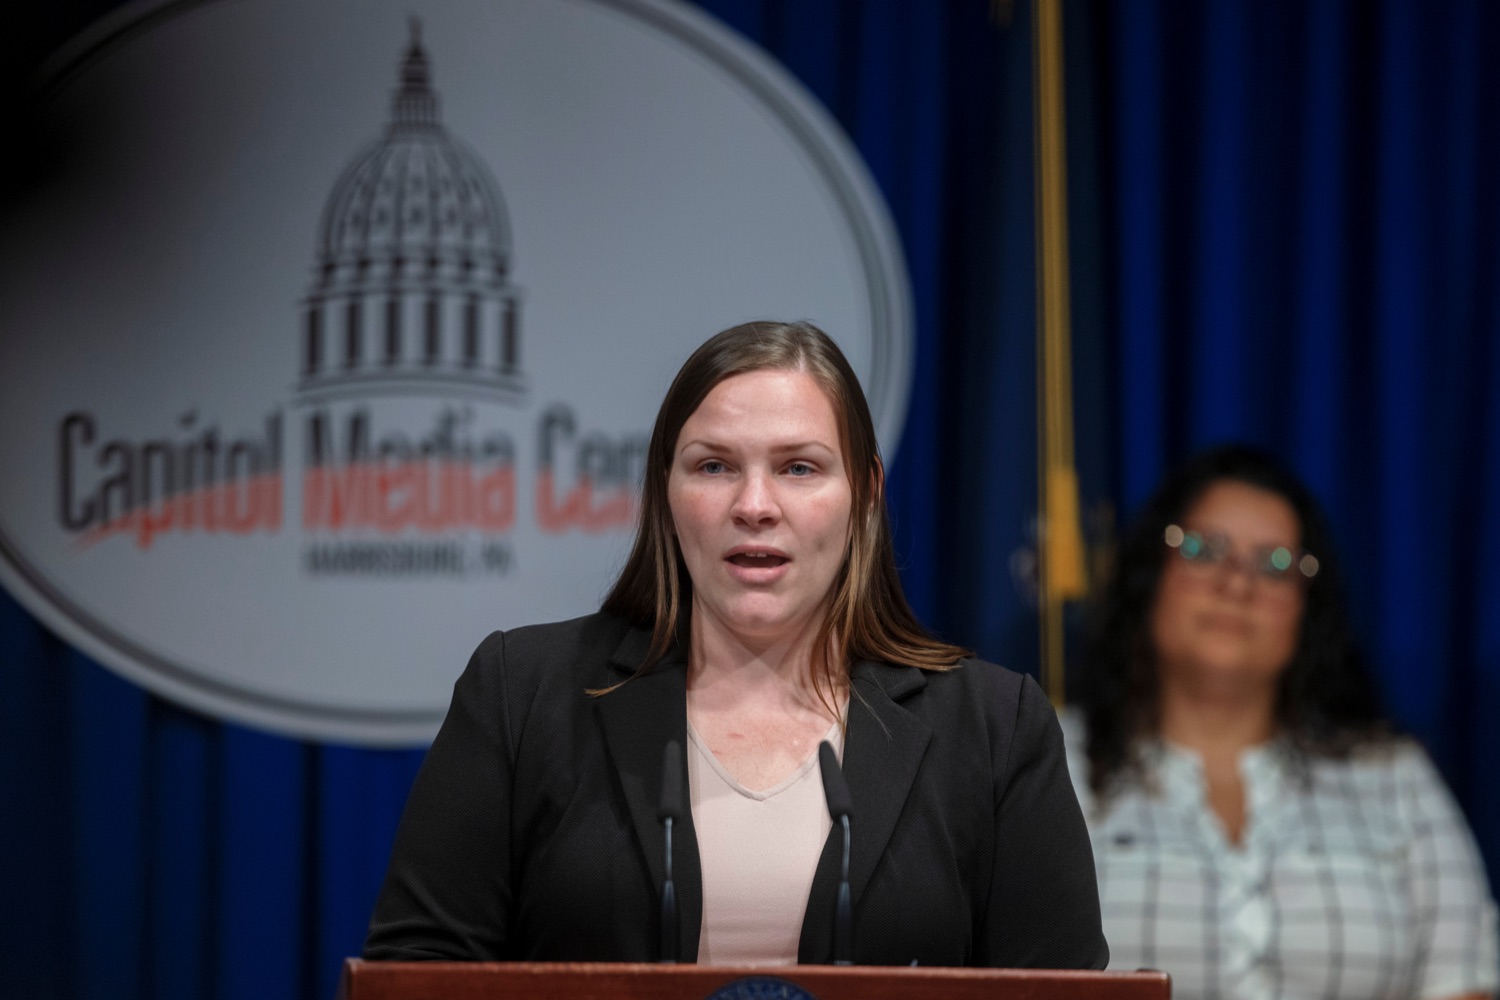 Moriah Hathaway, executive director of the Commission for Women, speaks during a press conference, which highlighted the Wolf Administrations efforts to expand voter access, inside the Capitol Media Center on Tuesday, September 13, 2022. The press conference reminded Pennsylvanians Oct 24. is the deadline to register to vote in the November election. Whether a voter is requesting a no-excuse mail-in ballot from the comfort of their home or showing up to the polls on Election Day and proudly wearing an I voted sticker, voting is a constitutional right and a way for people to make their voice heard, Acting Secretary of State Leigh M. Chapman said. I am honored to be part of an administration that continues to work hard so everyone has equal access to the ballot box. .<br><a href="https://filesource.amperwave.net/commonwealthofpa/photo/22138_CFW_VotingPA_NK_016.JPG" target="_blank">⇣ Download Photo</a>